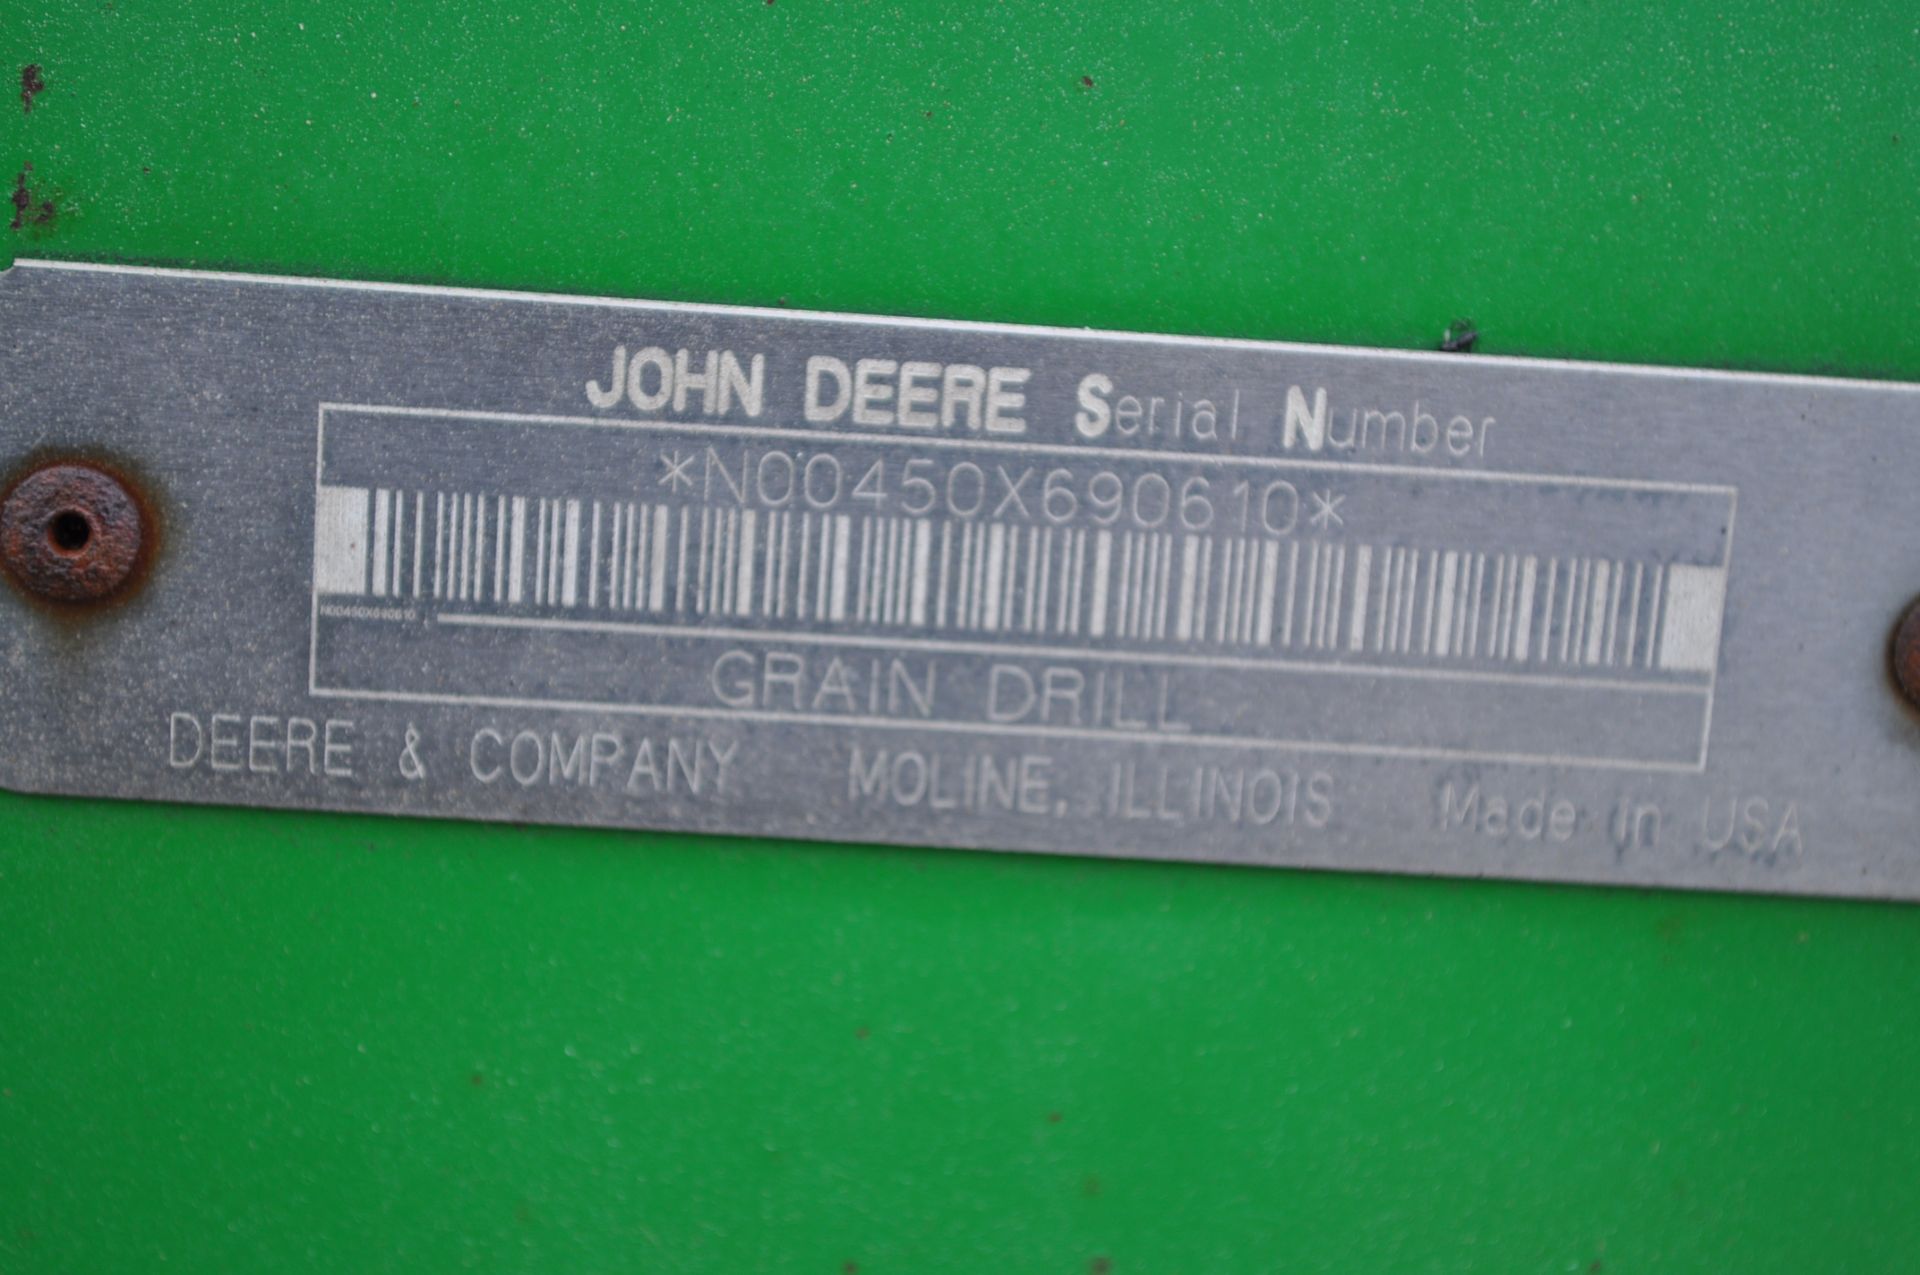 John Deere 450 end wheel grain drill, 17 hole, 7.50-20 tires, SN 690610, low acres - Image 7 of 8